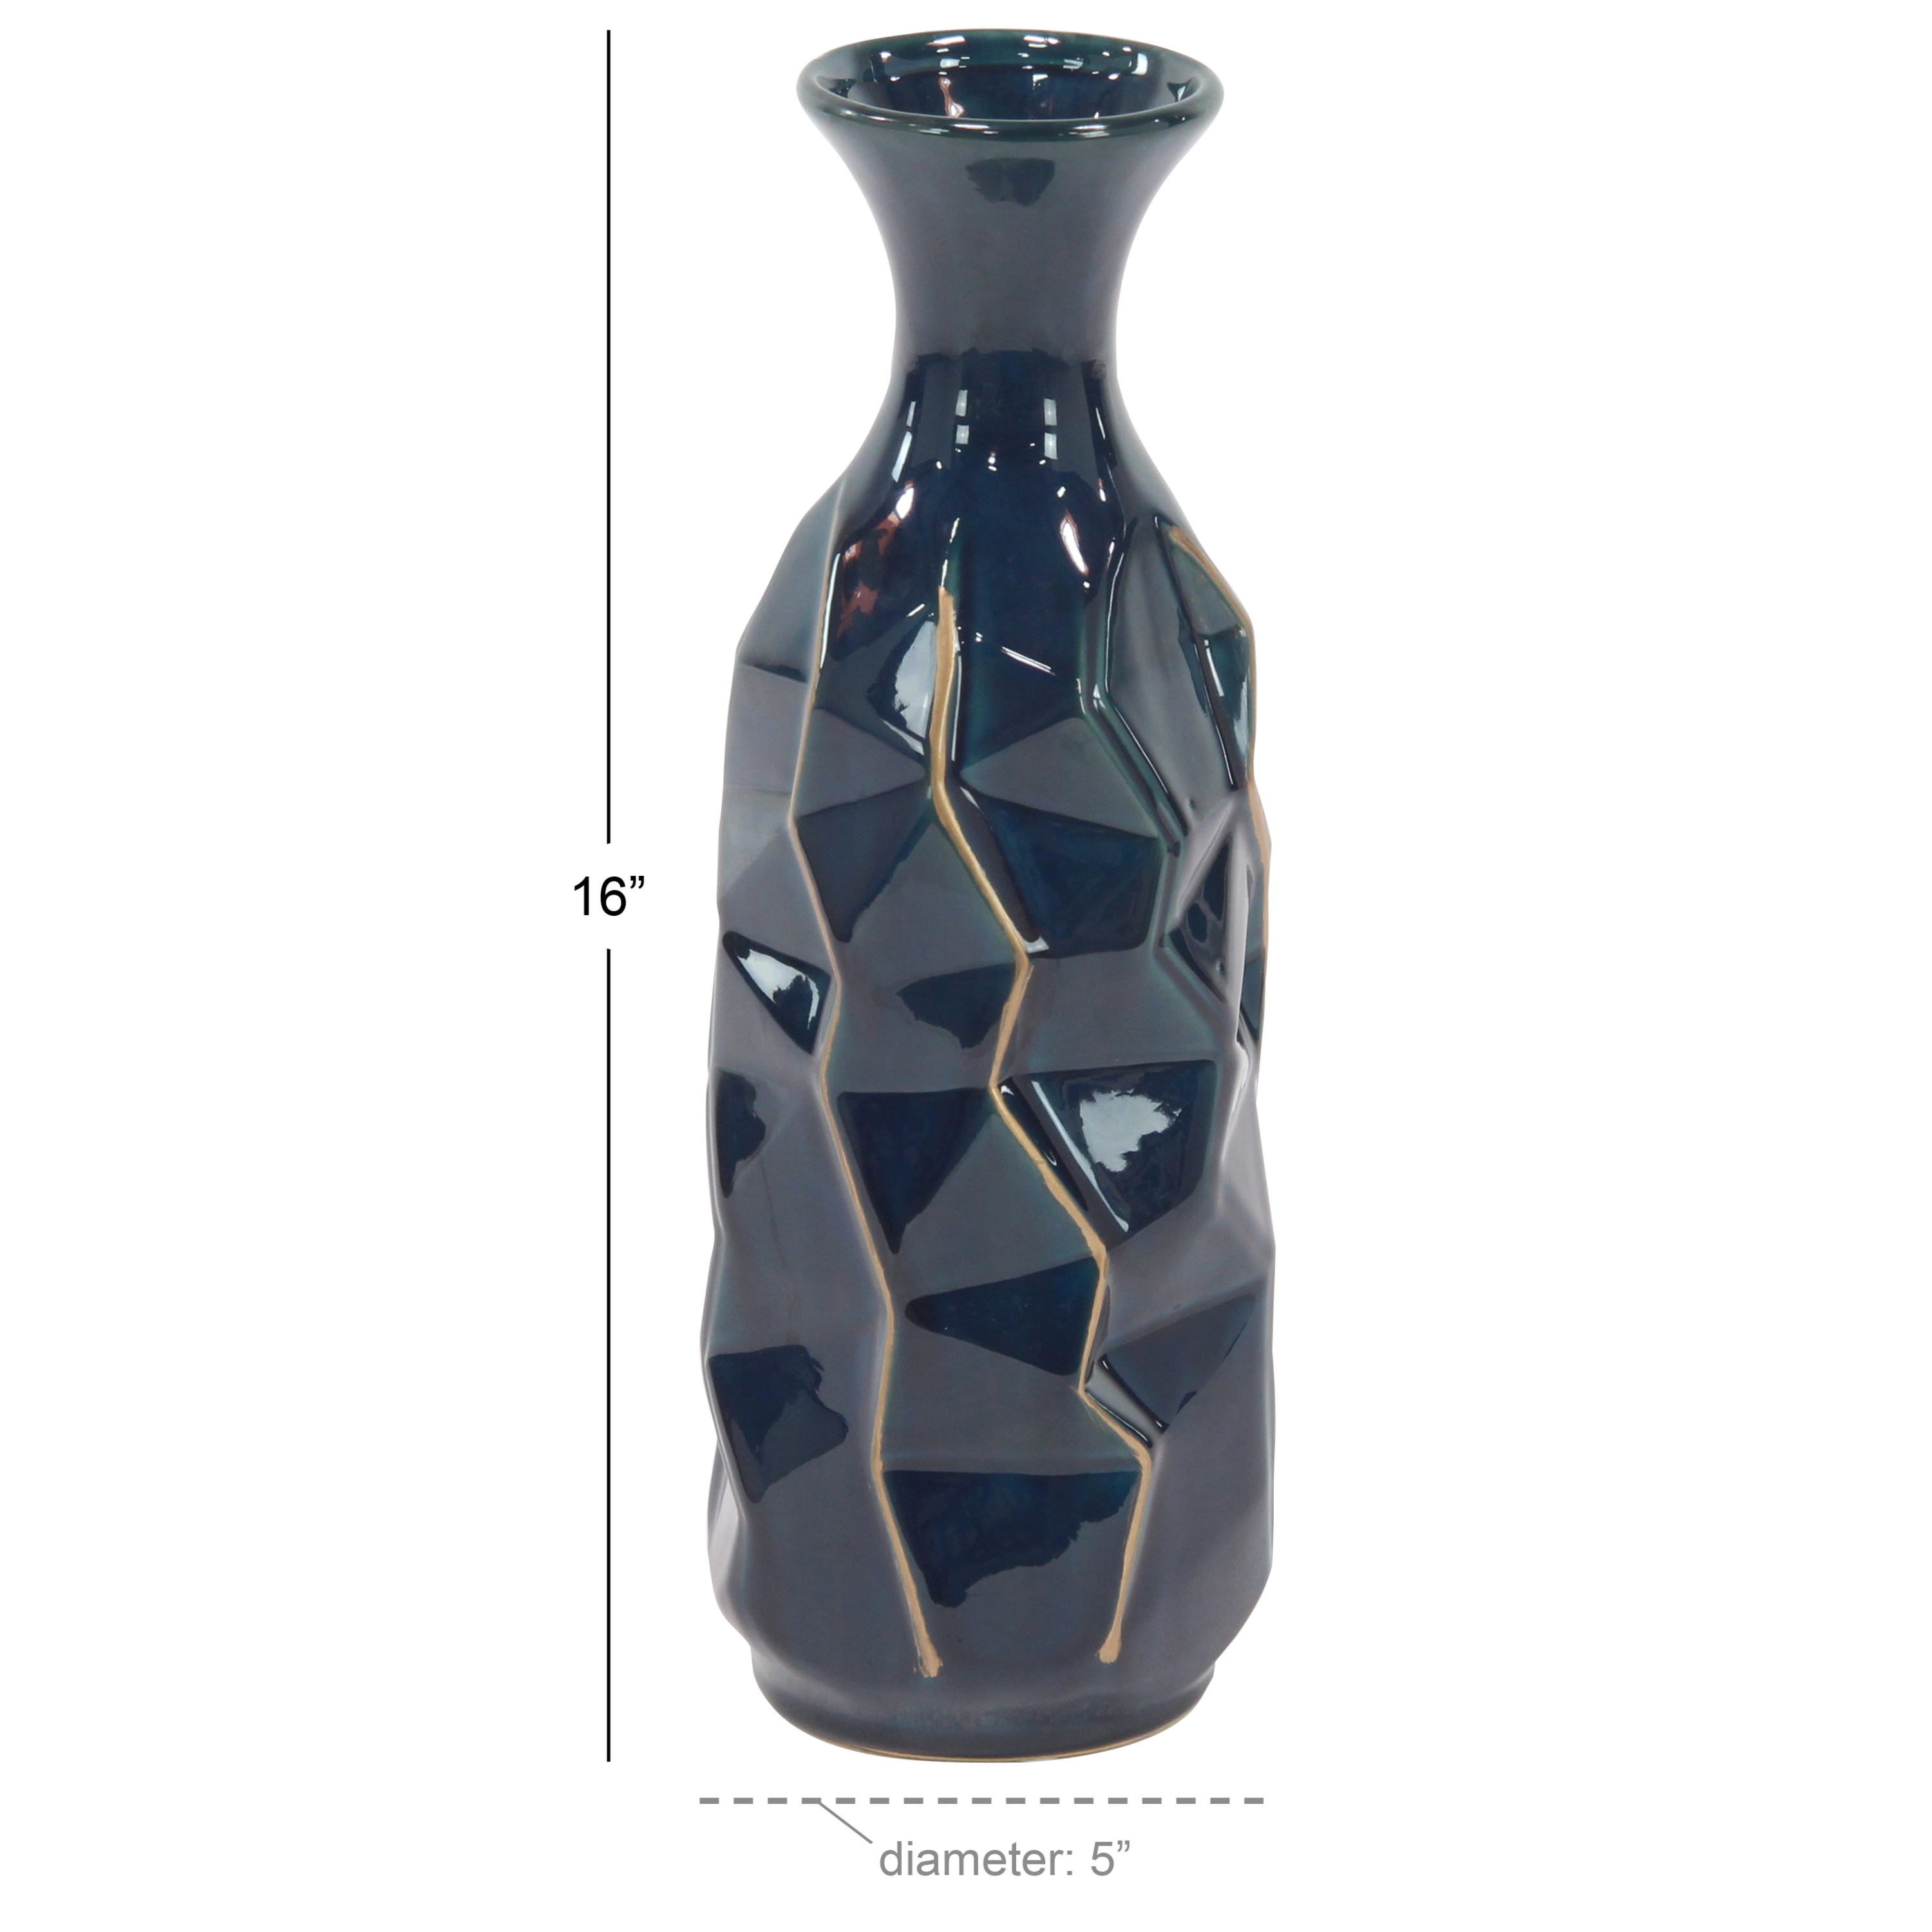 DecMode Blue Ceramic Modern and Coastal Vase 5"W x 15"H, featuring Minimalist Design with clean Lines and Angular Structures - image 3 of 12